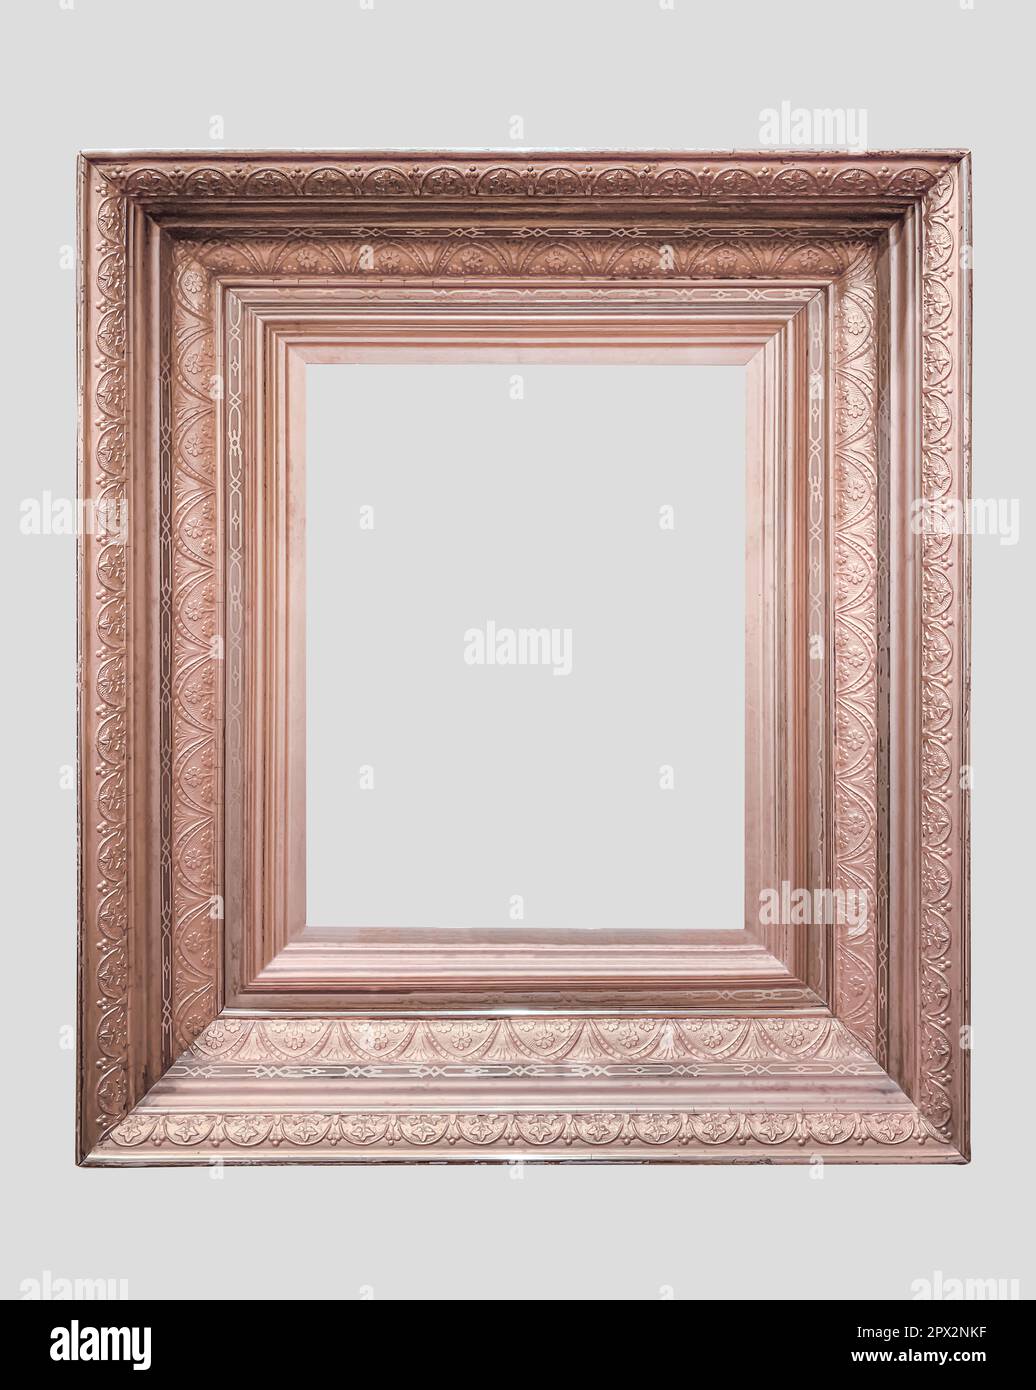 Rose gold metallic frame broad wide detailed classical gallery art luxury isolated light gray background Stock Photo